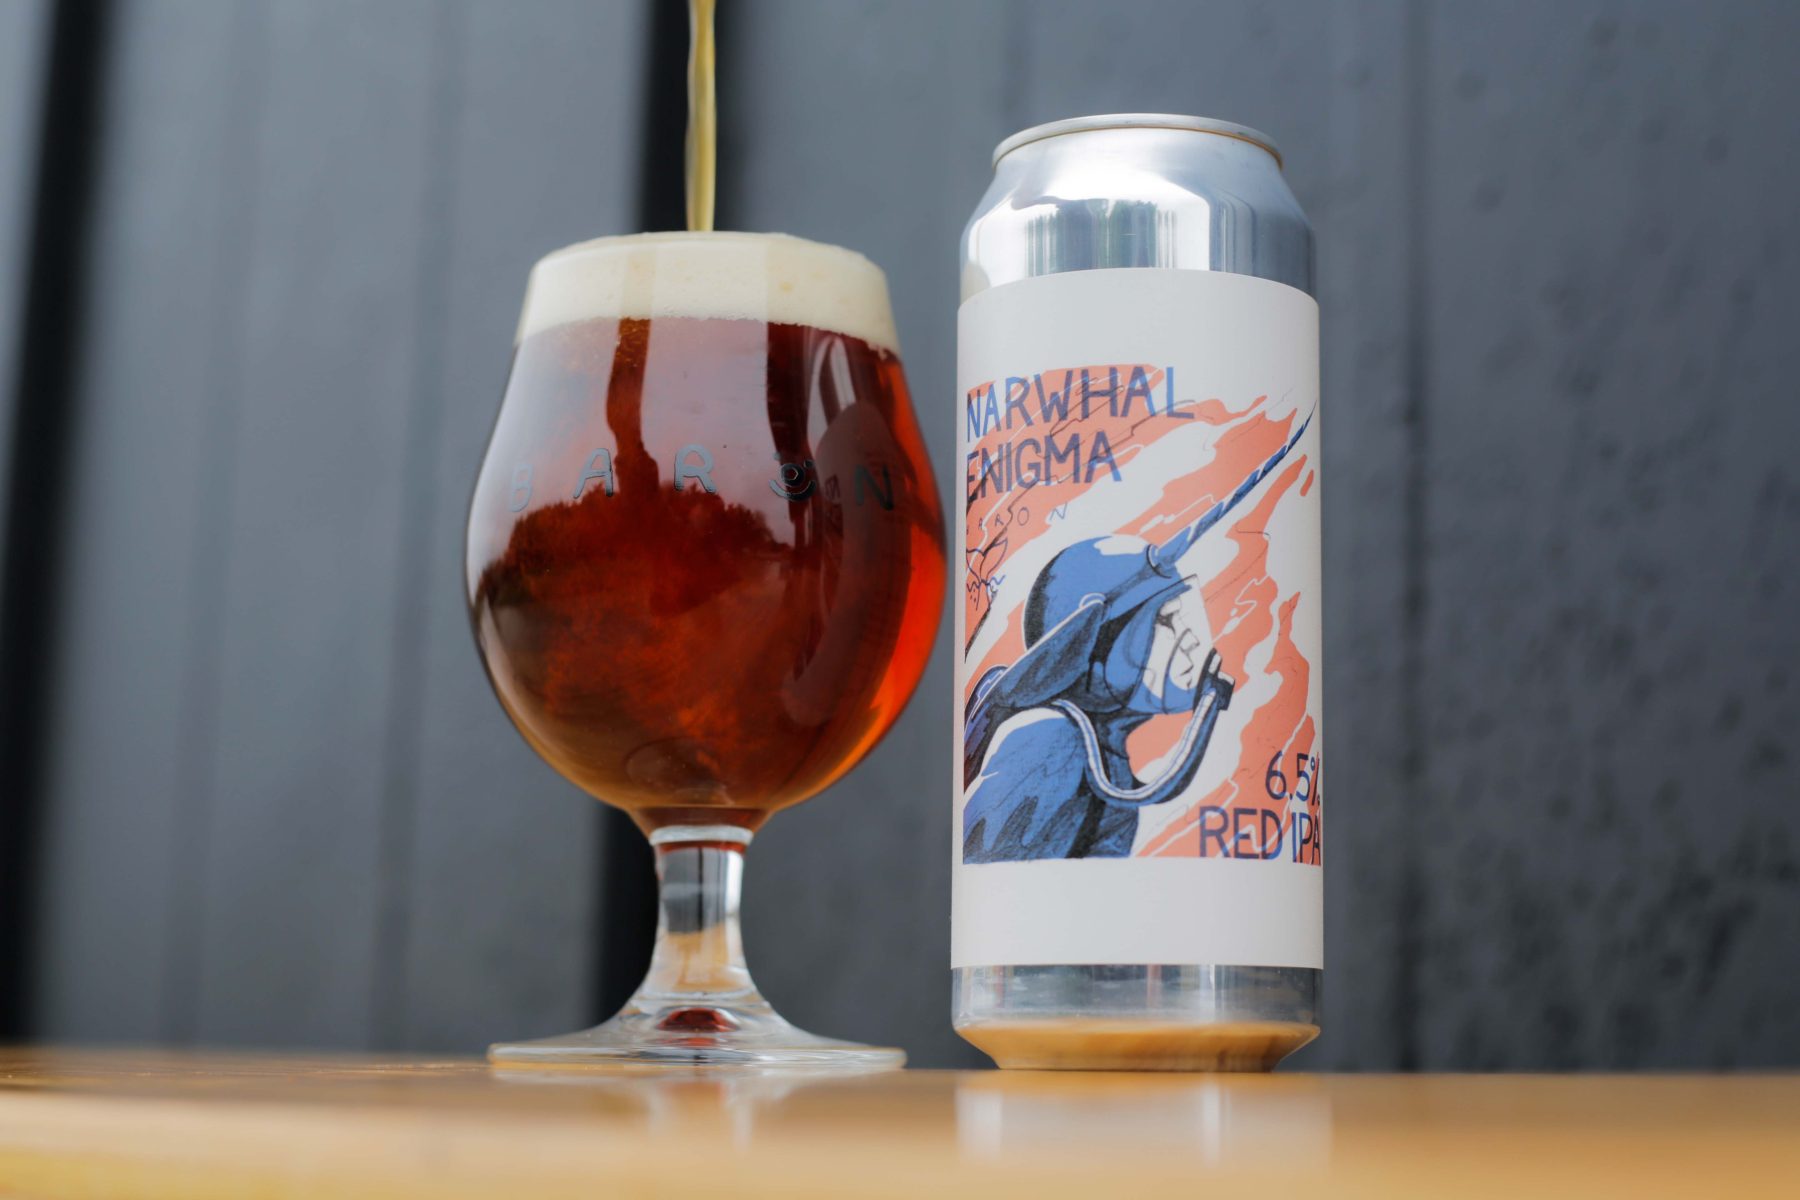 Narwhal Enigma – 6.5% Red IPA – 500ml